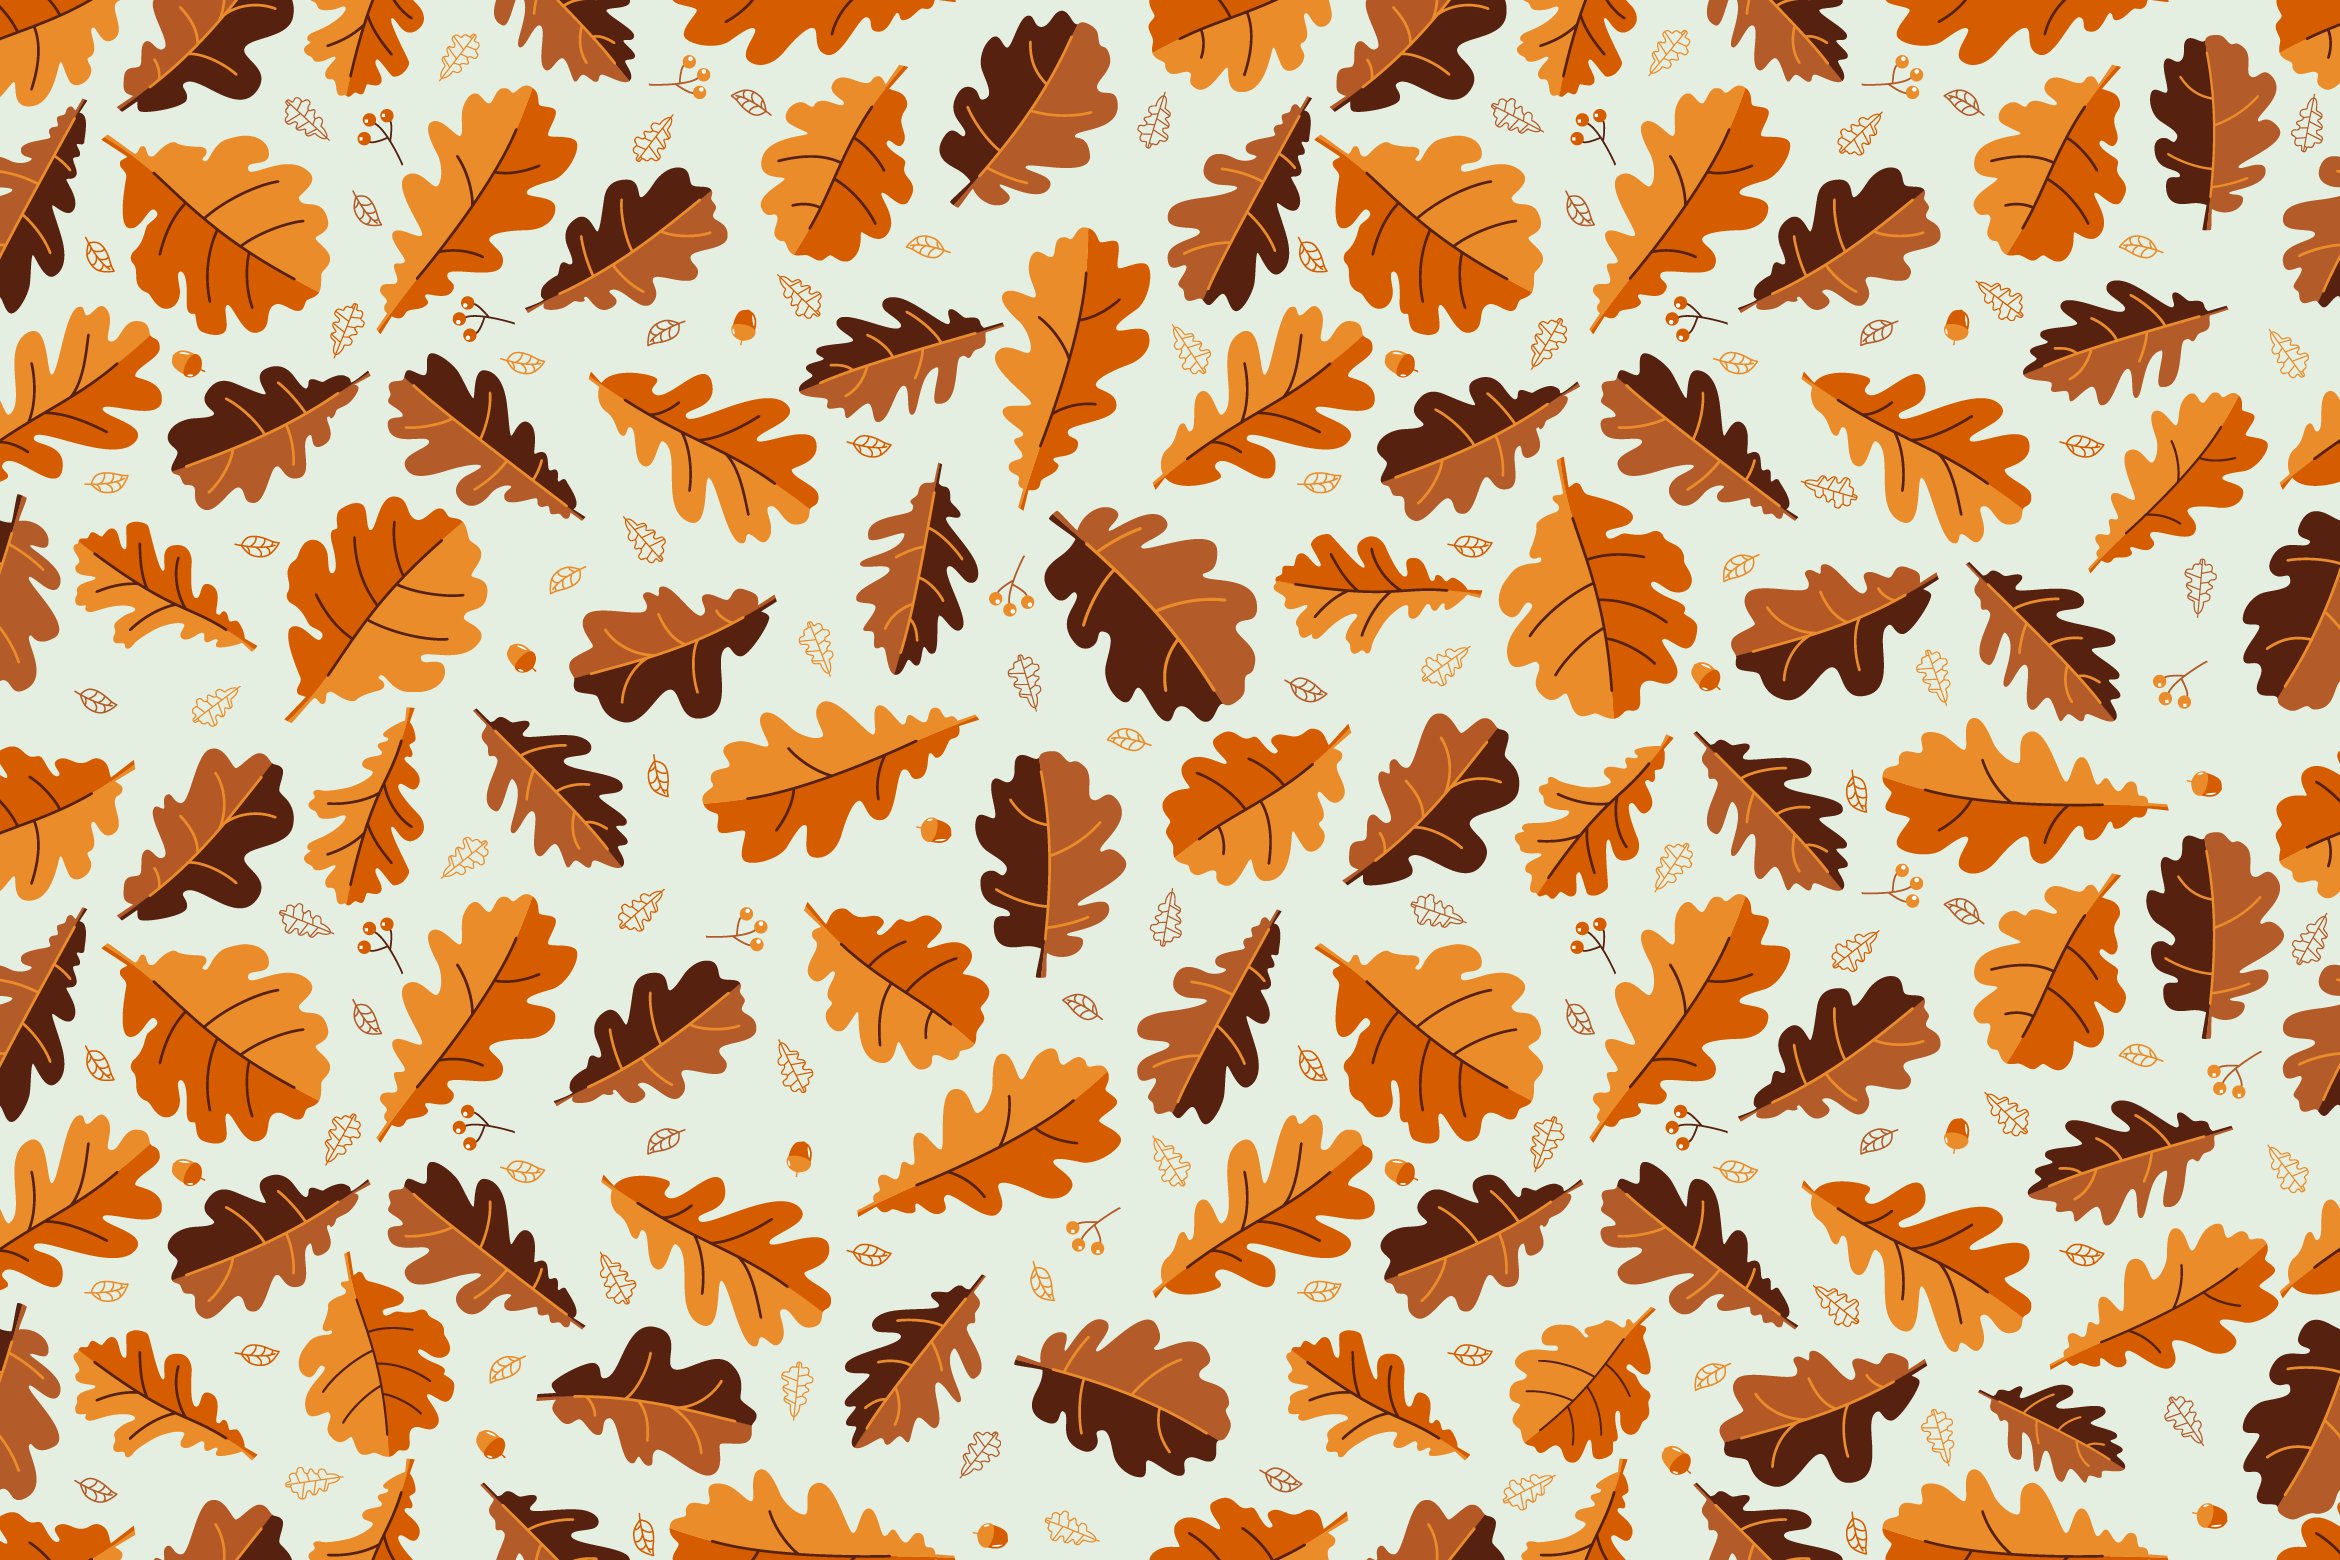 Orange and brown leaf pattern on a white background.